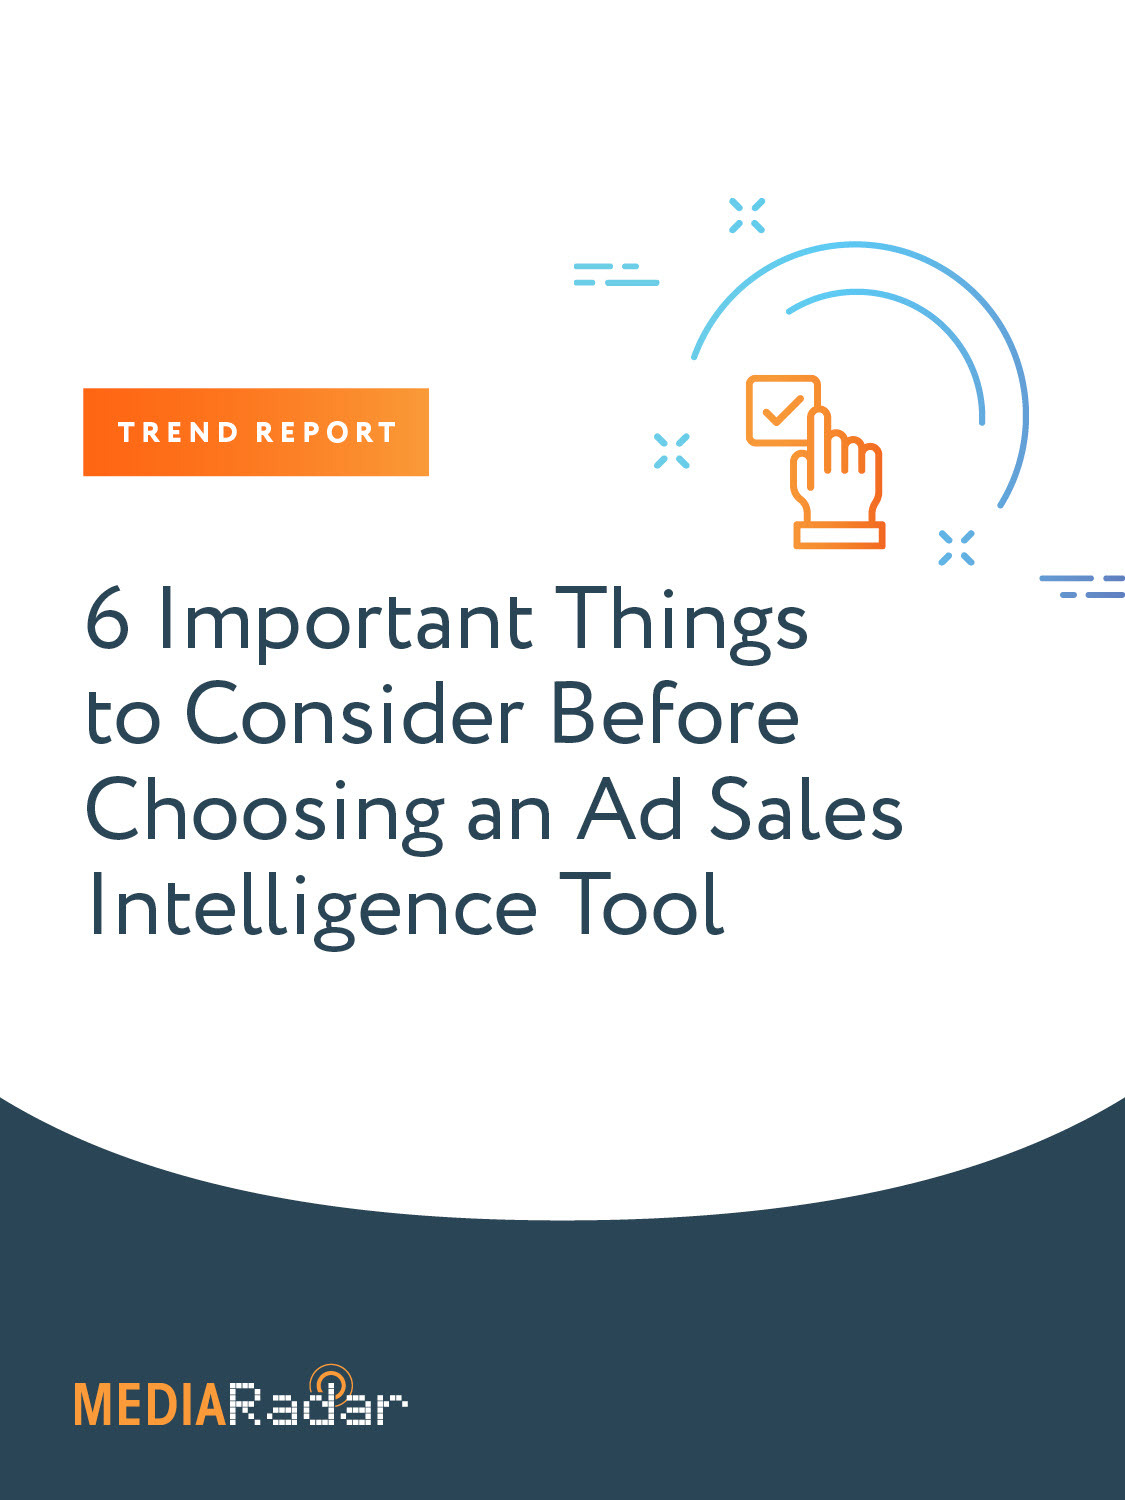 6 Important Things to Consider When Choosing an Ad Sales Intelligence Tool